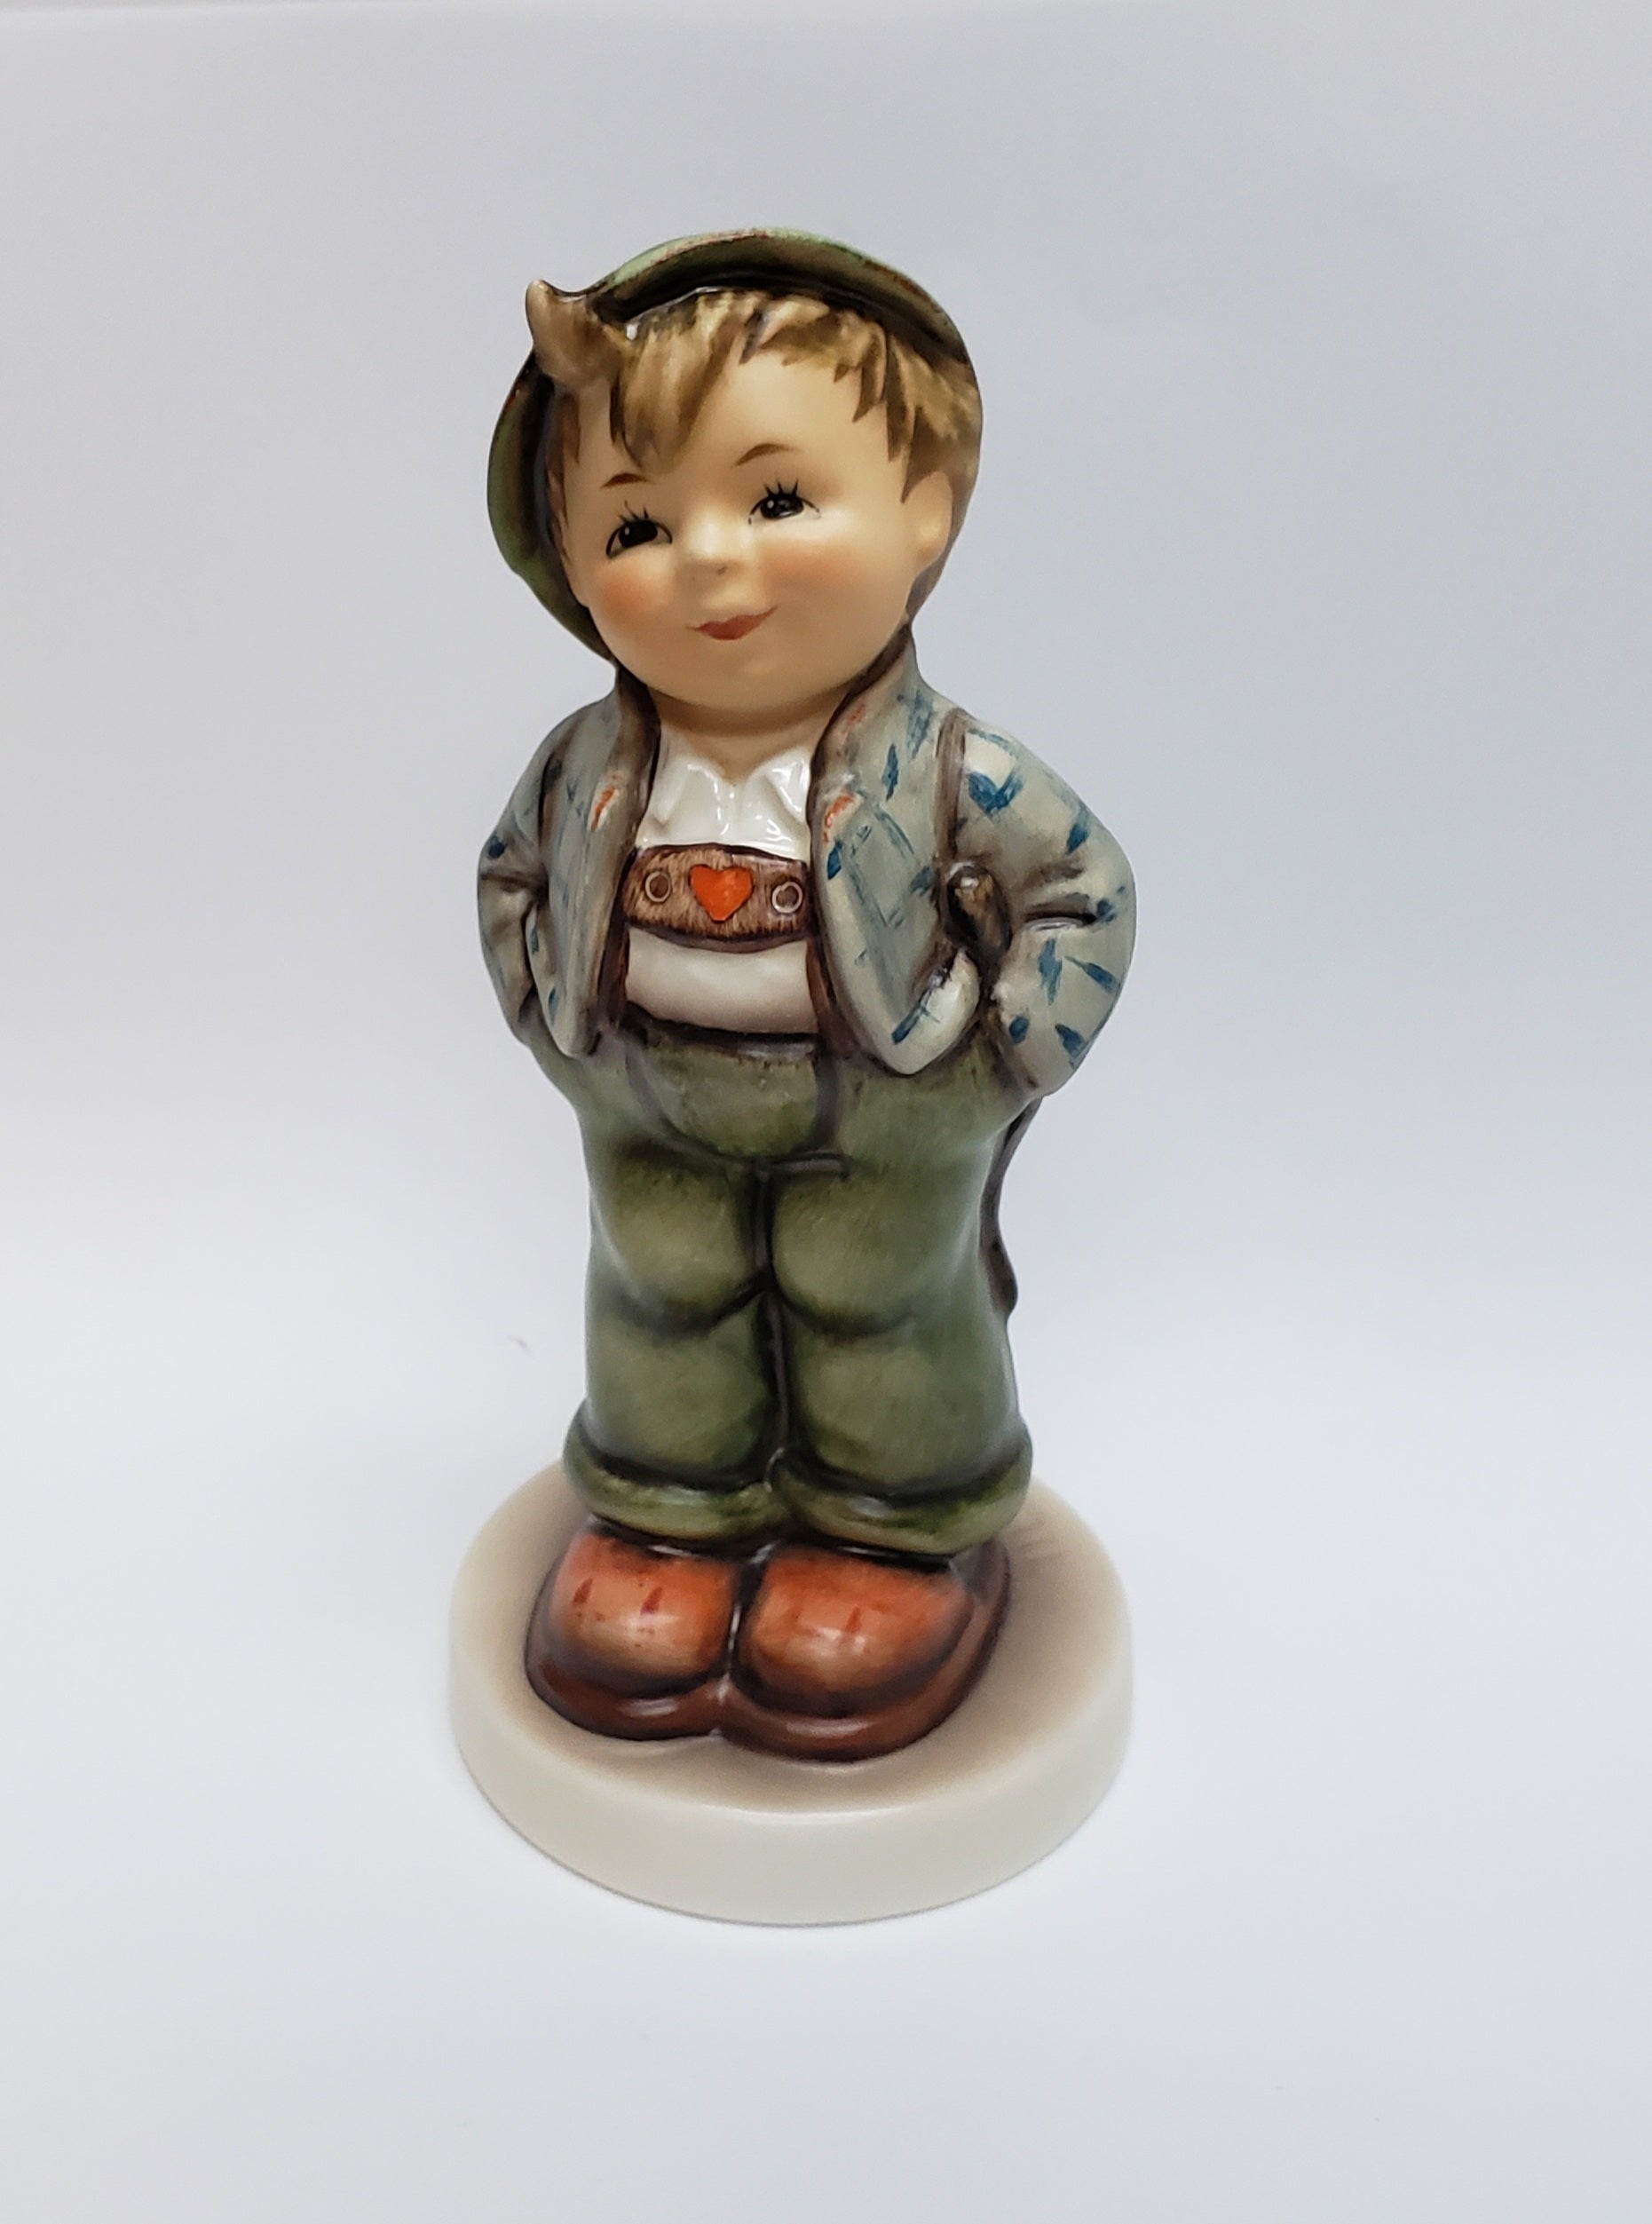 Hummel figurine proclamation w/village or country motive, original MI Hummel  Collection, gift-boxed 